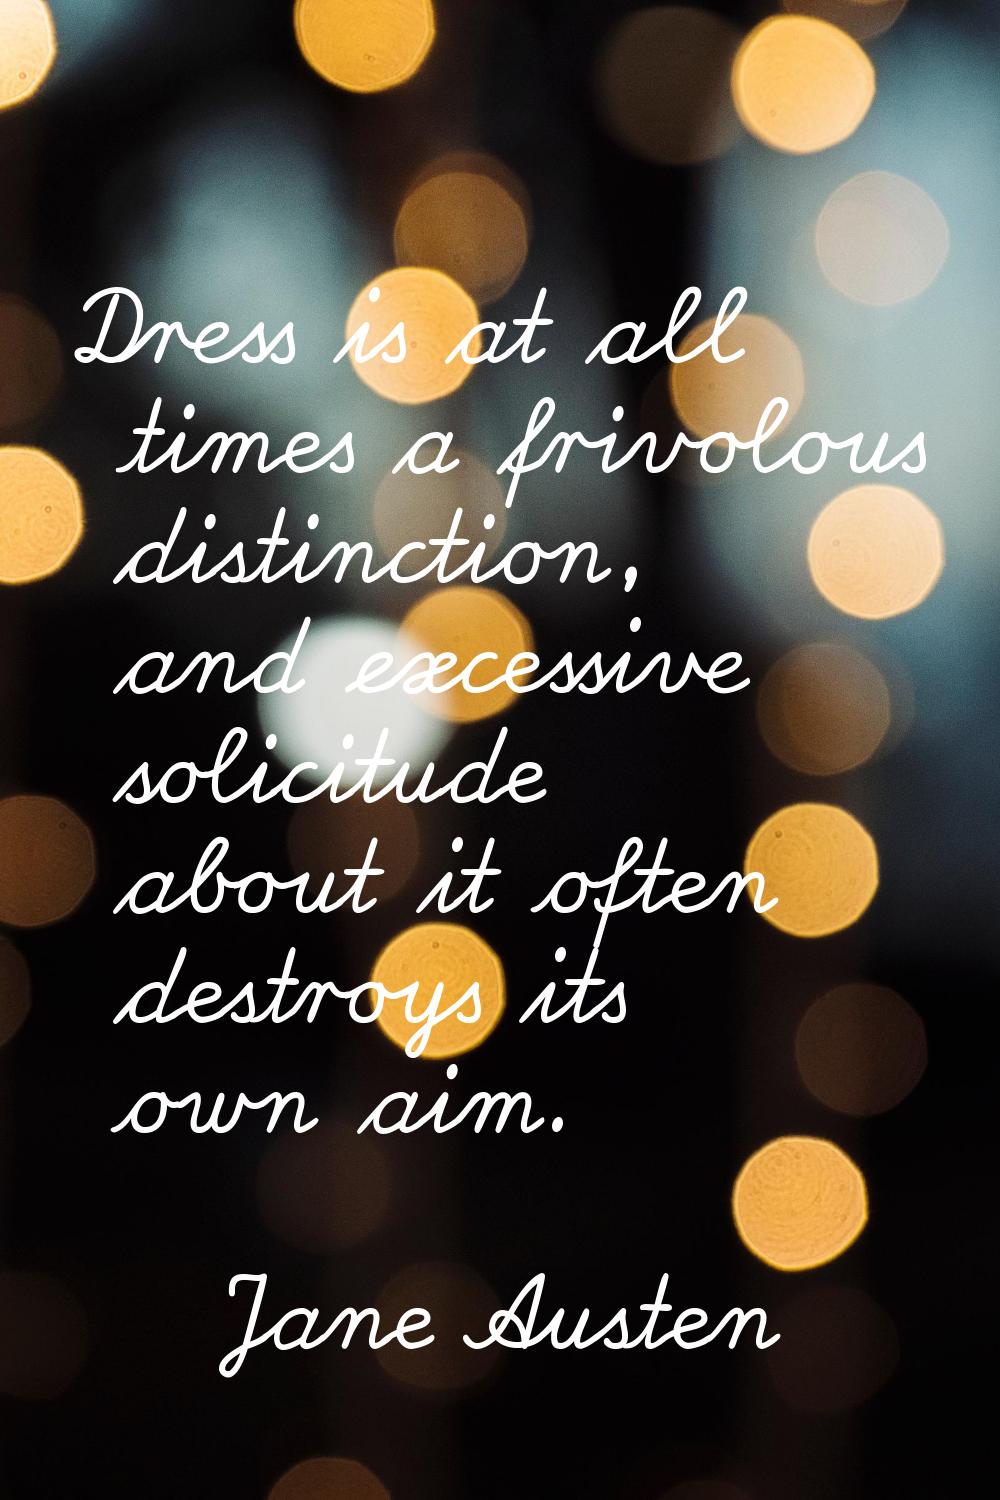 Dress is at all times a frivolous distinction, and excessive solicitude about it often destroys its